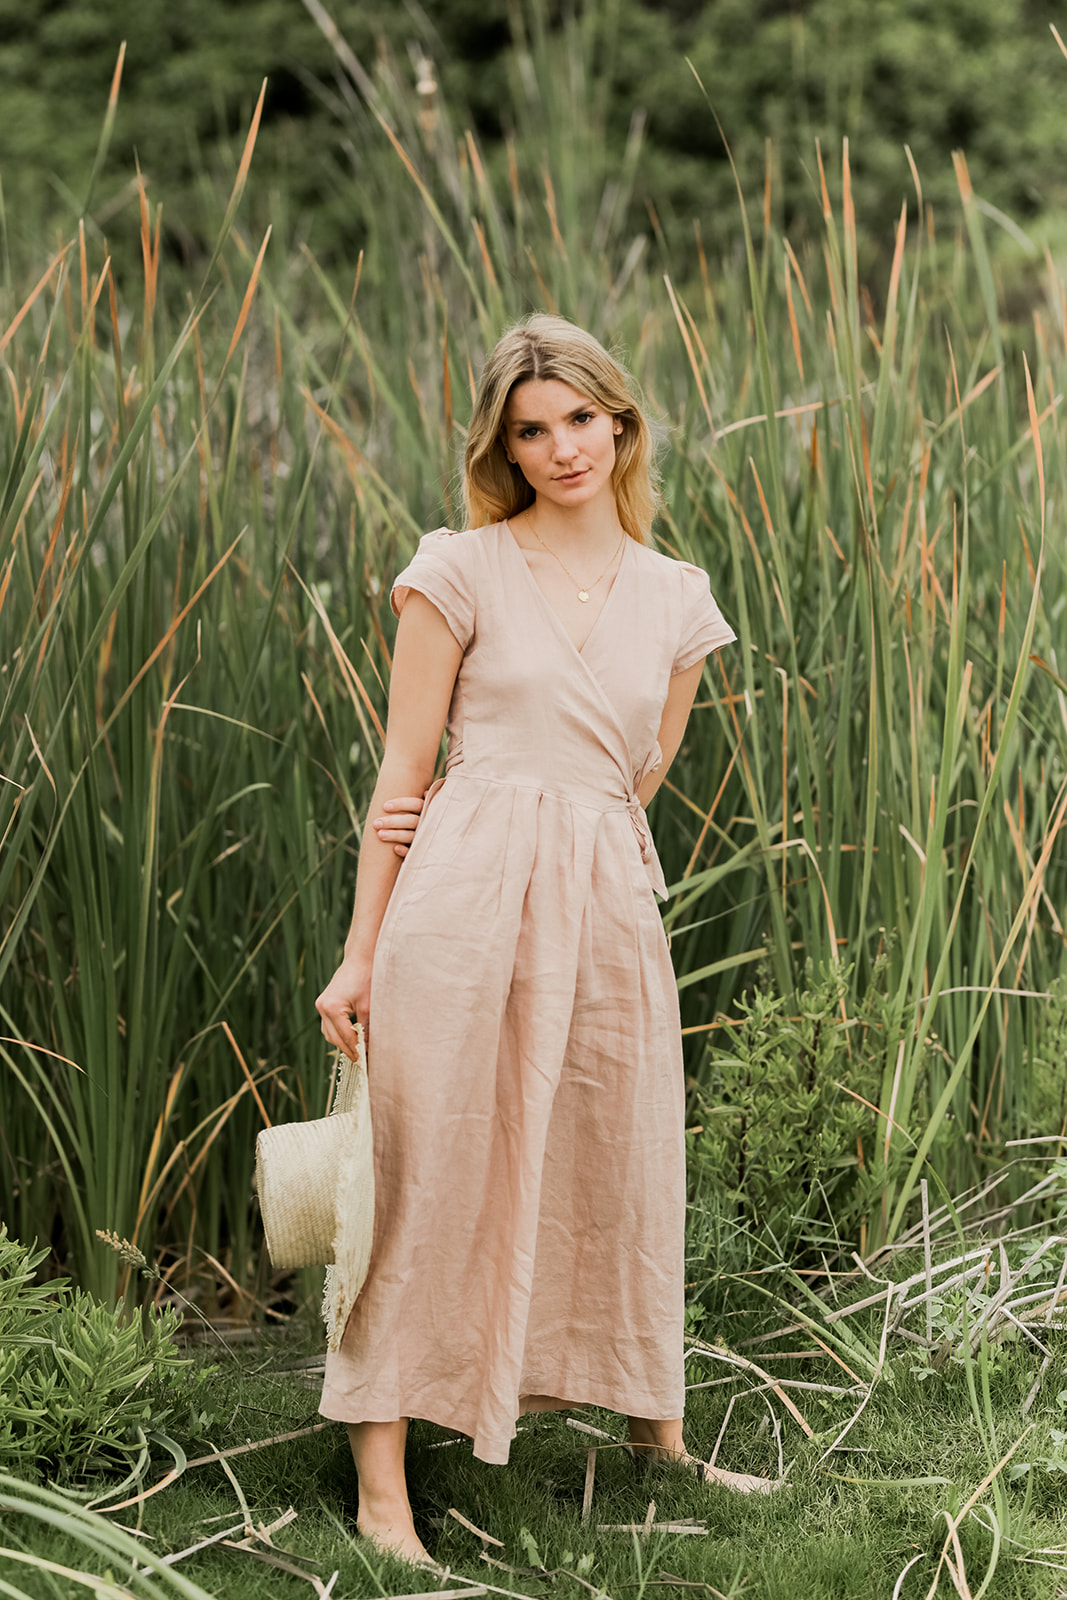 A woman in a beige dress standing among tall grasses with a straw bag at her side.